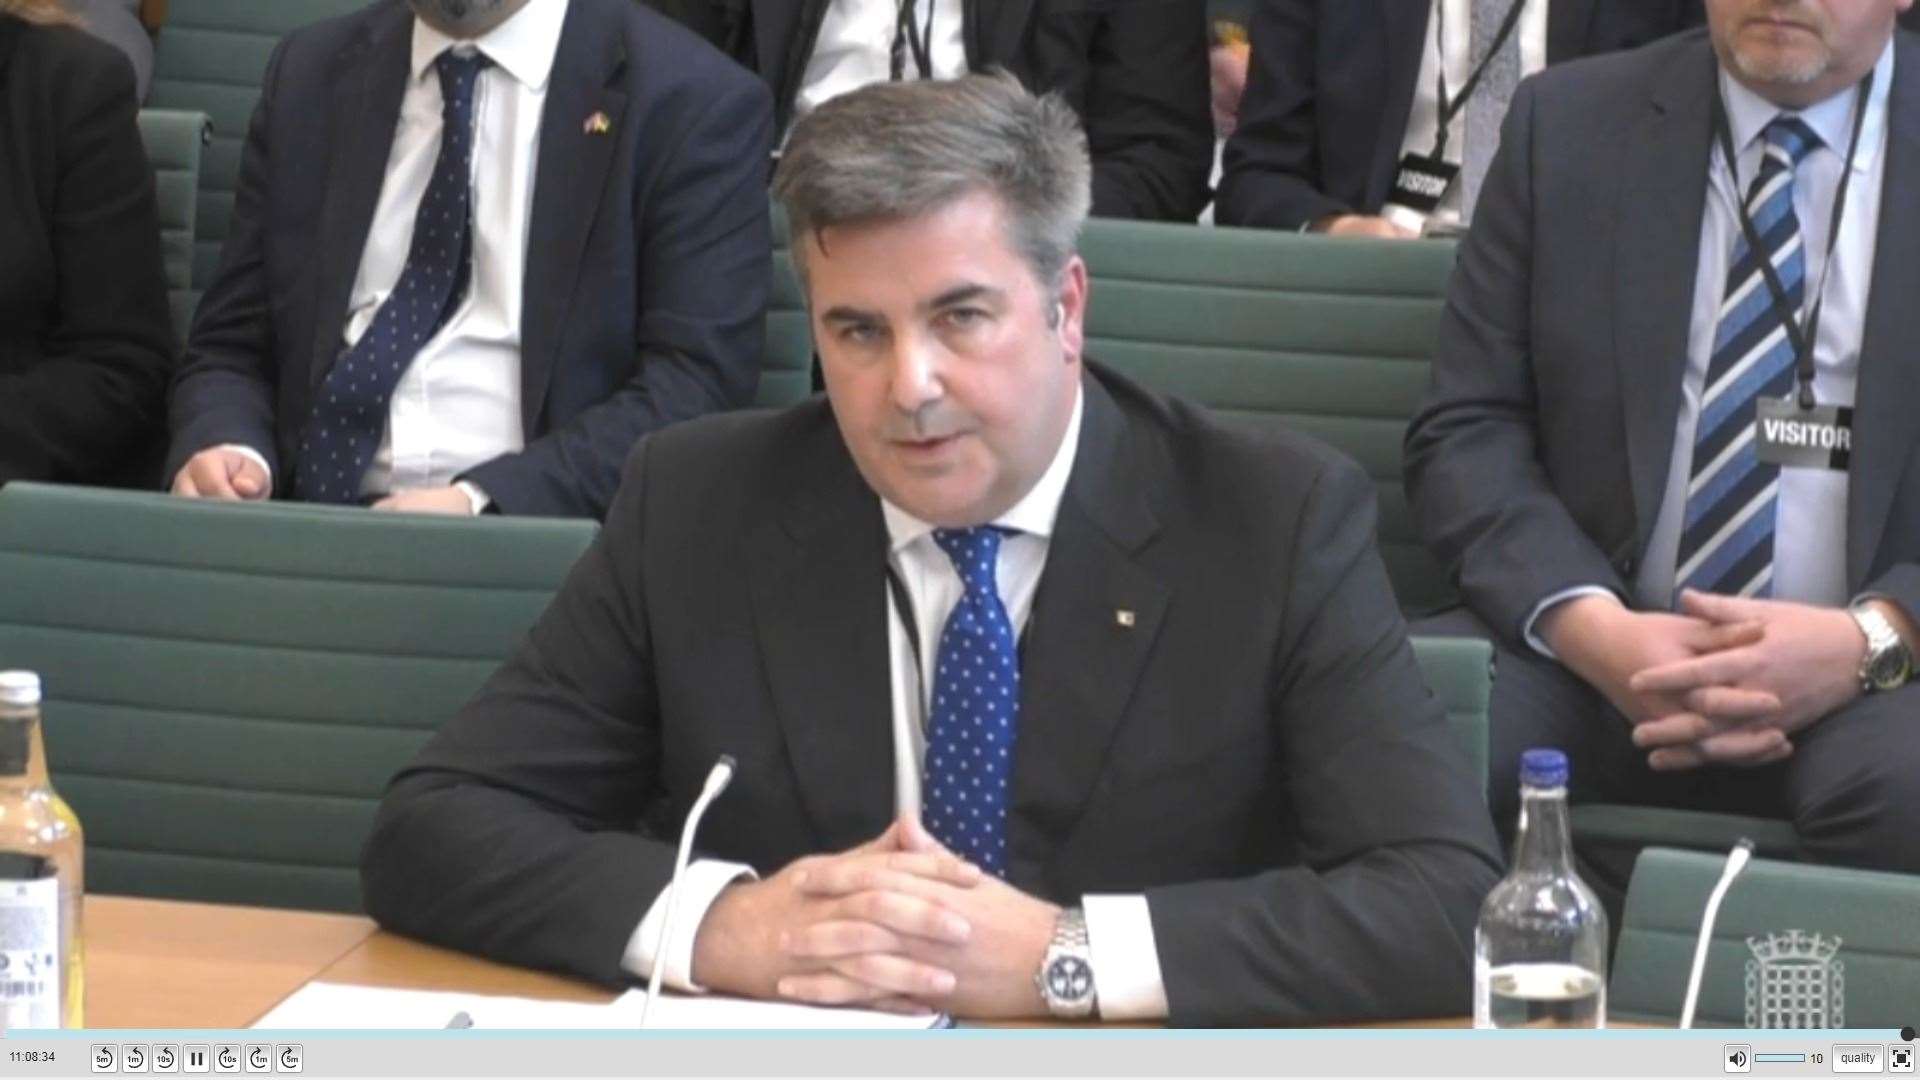 Chief executive of P&O Ferries Peter Hebblethwaite during his grilling by MPs